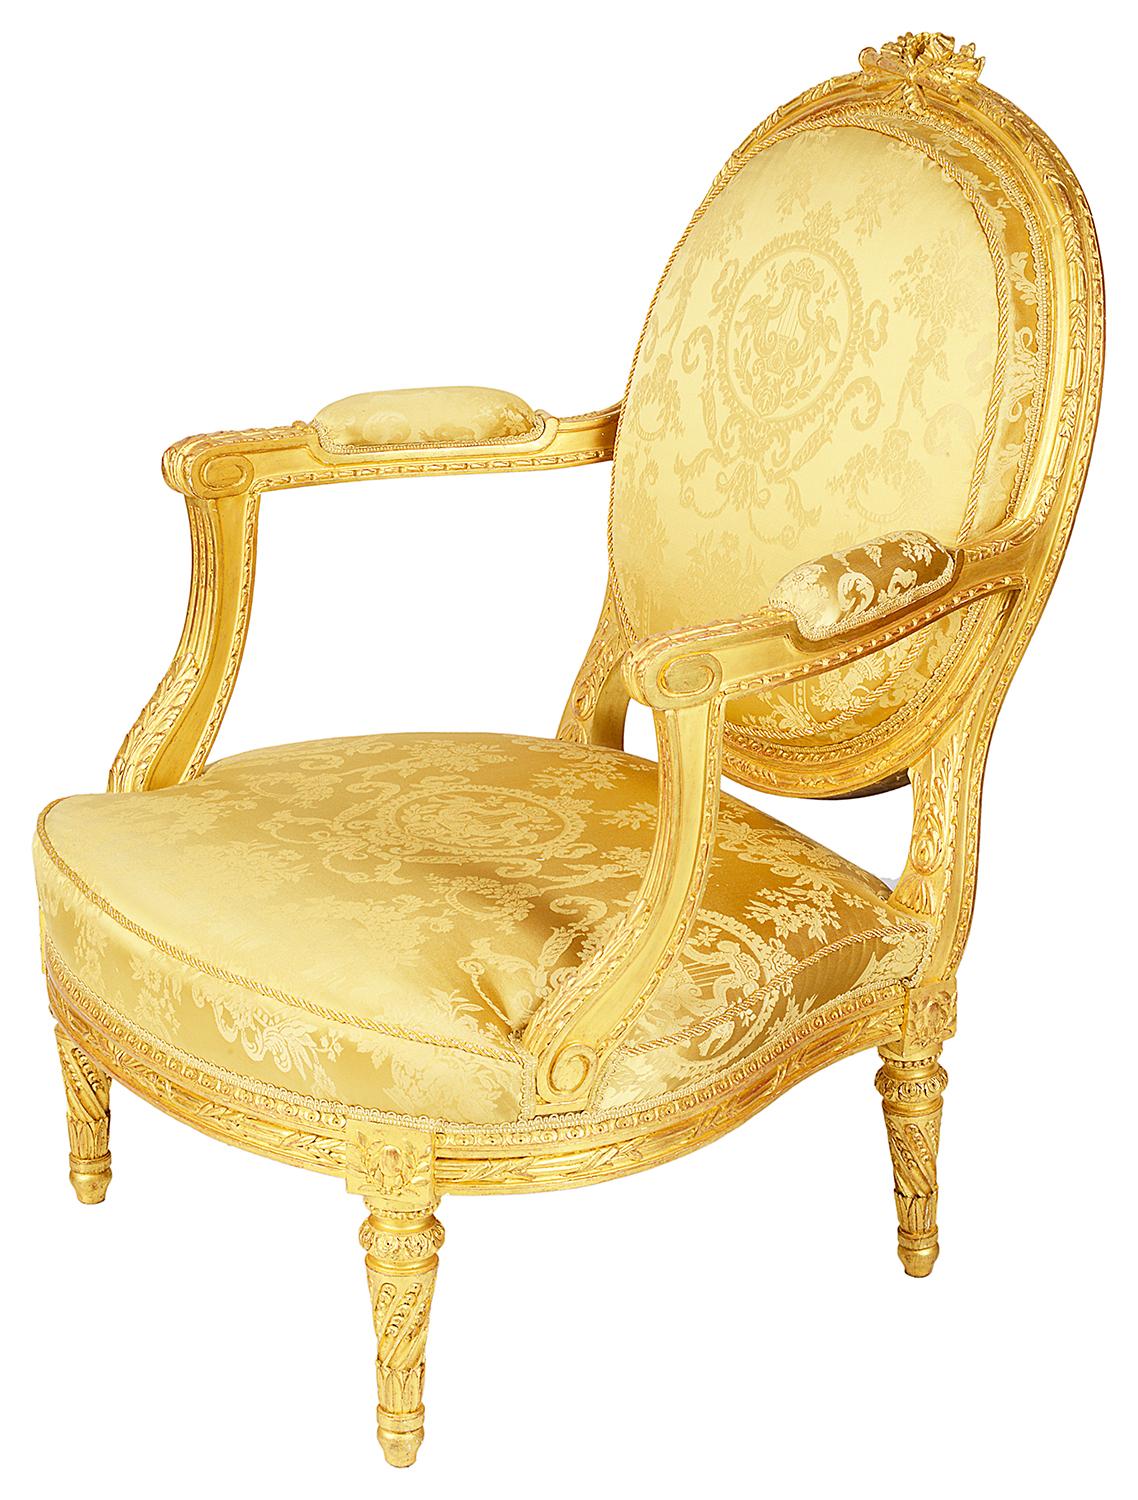 Carved Louis XVI Style Gilded French Salon Suite, 19th Century